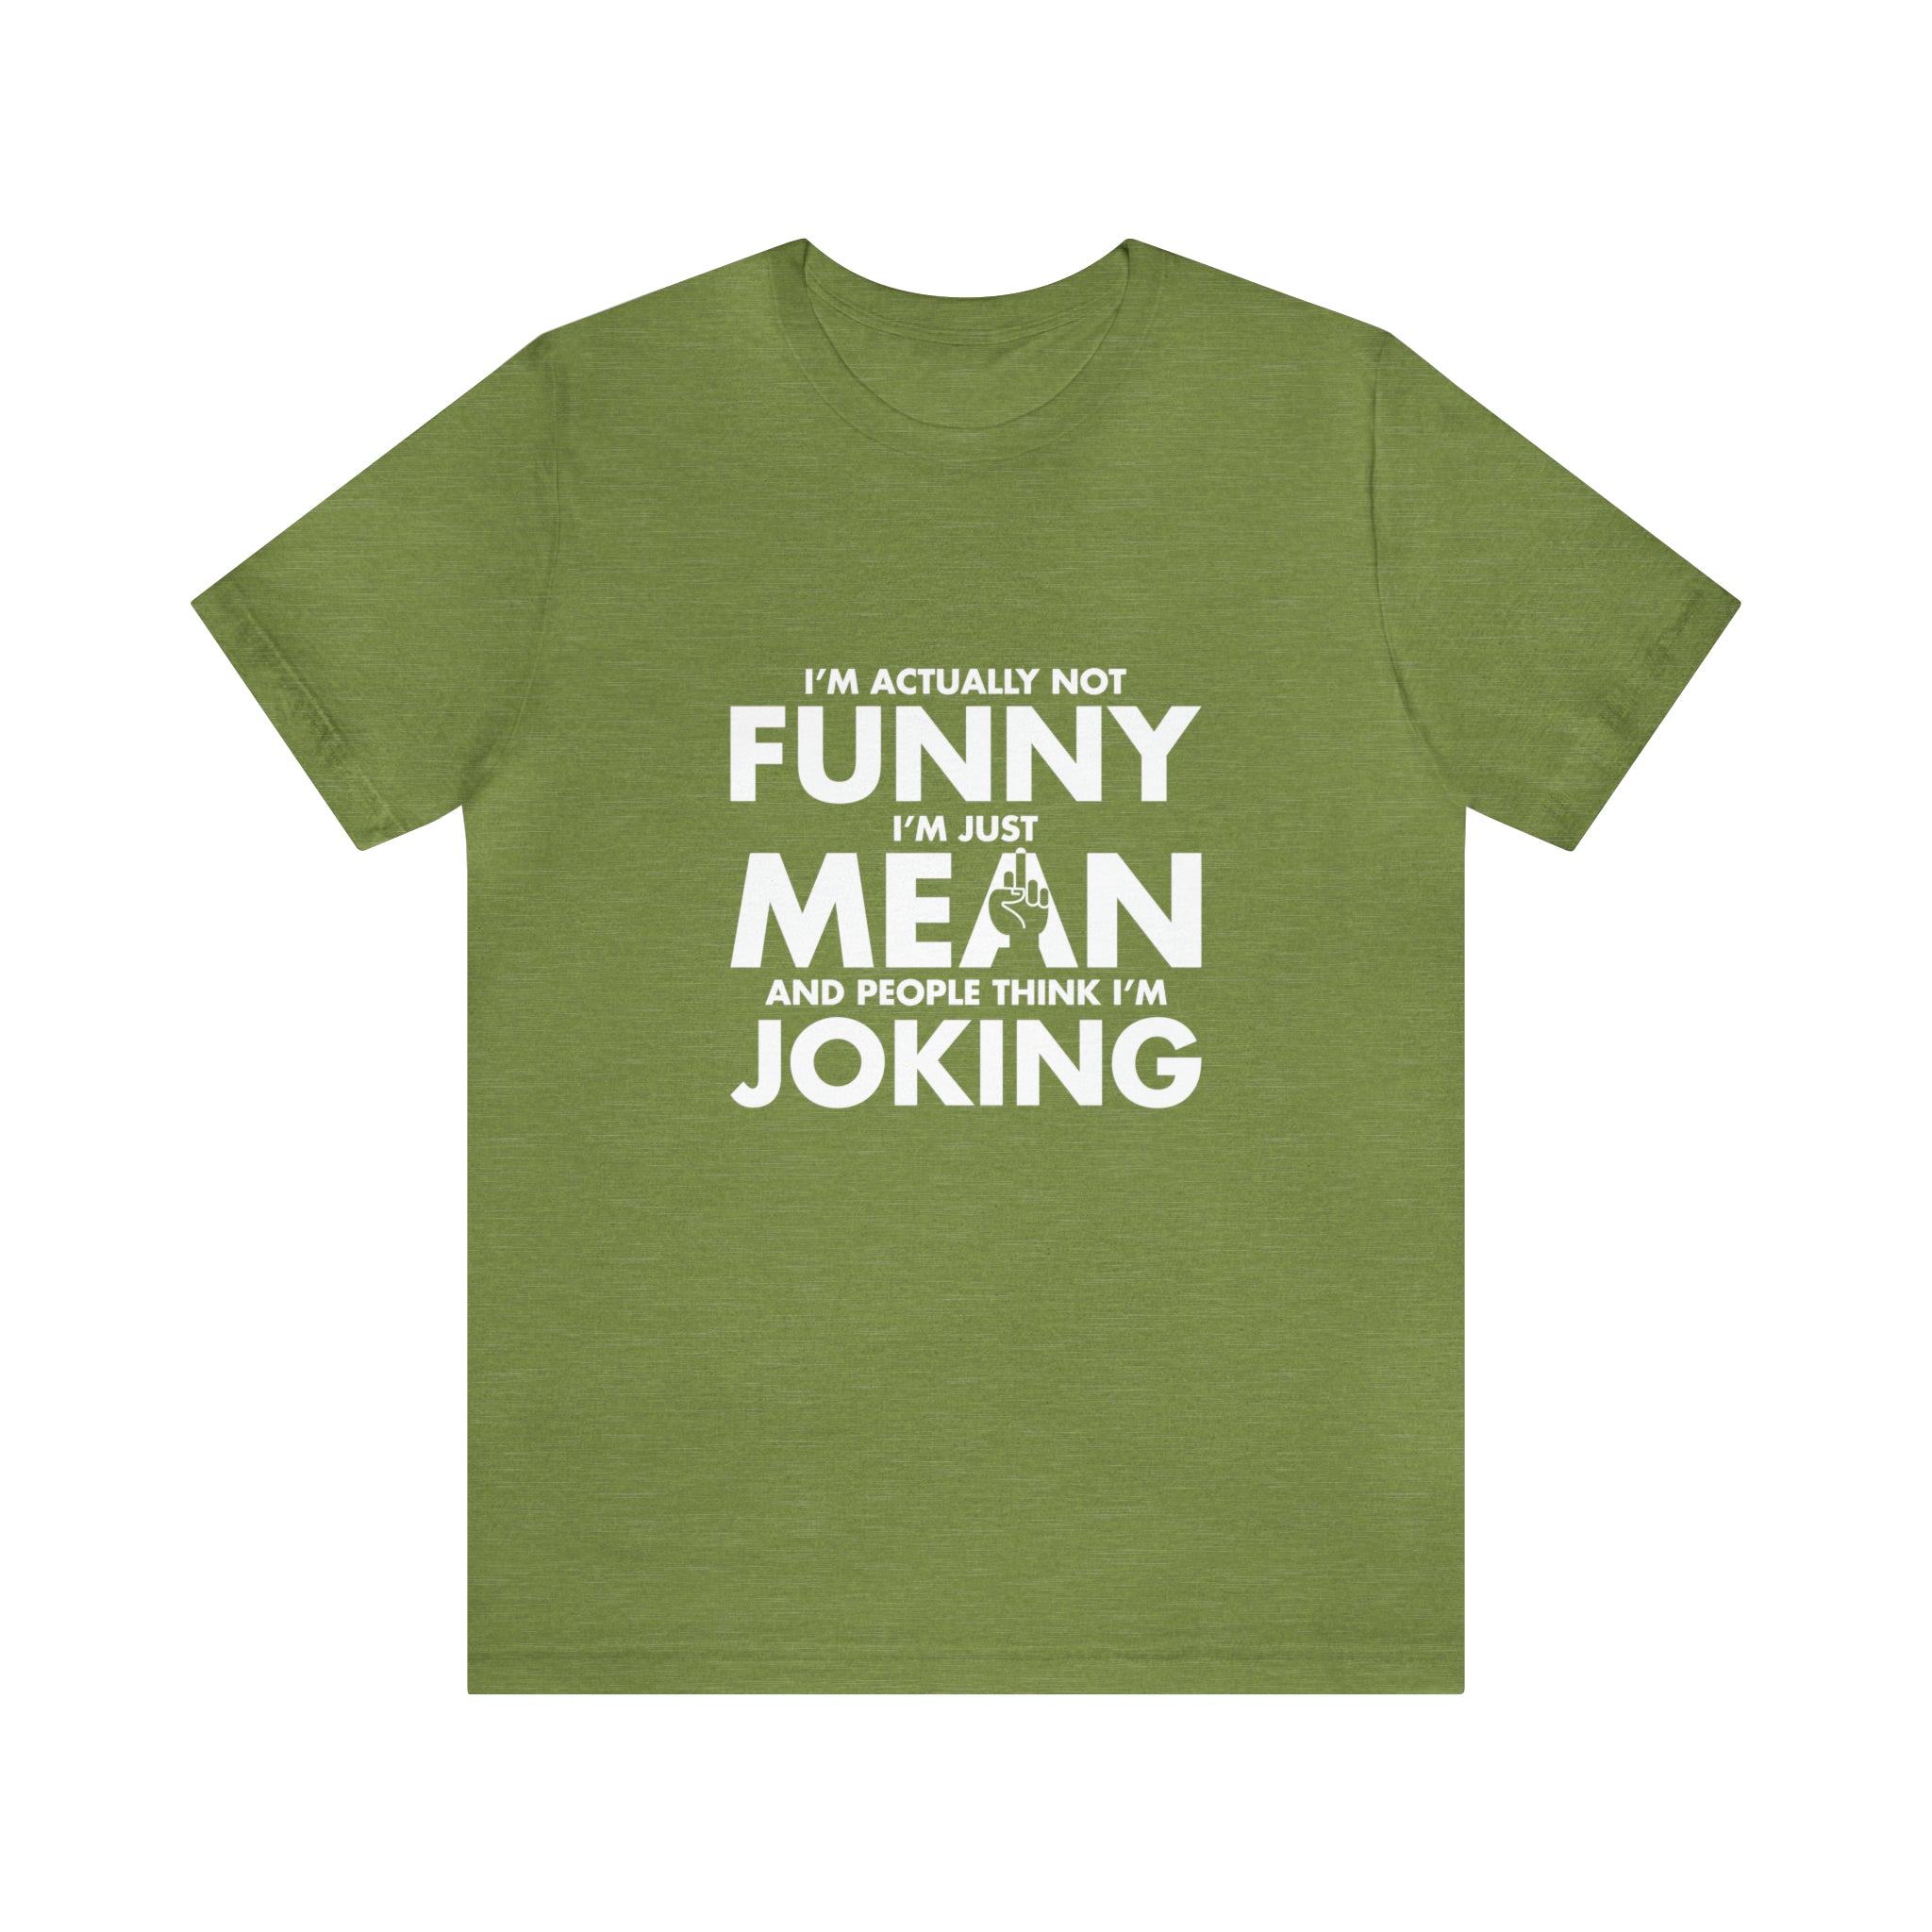 I am actually not funny I am just mean and people think I am joking T-Shirt